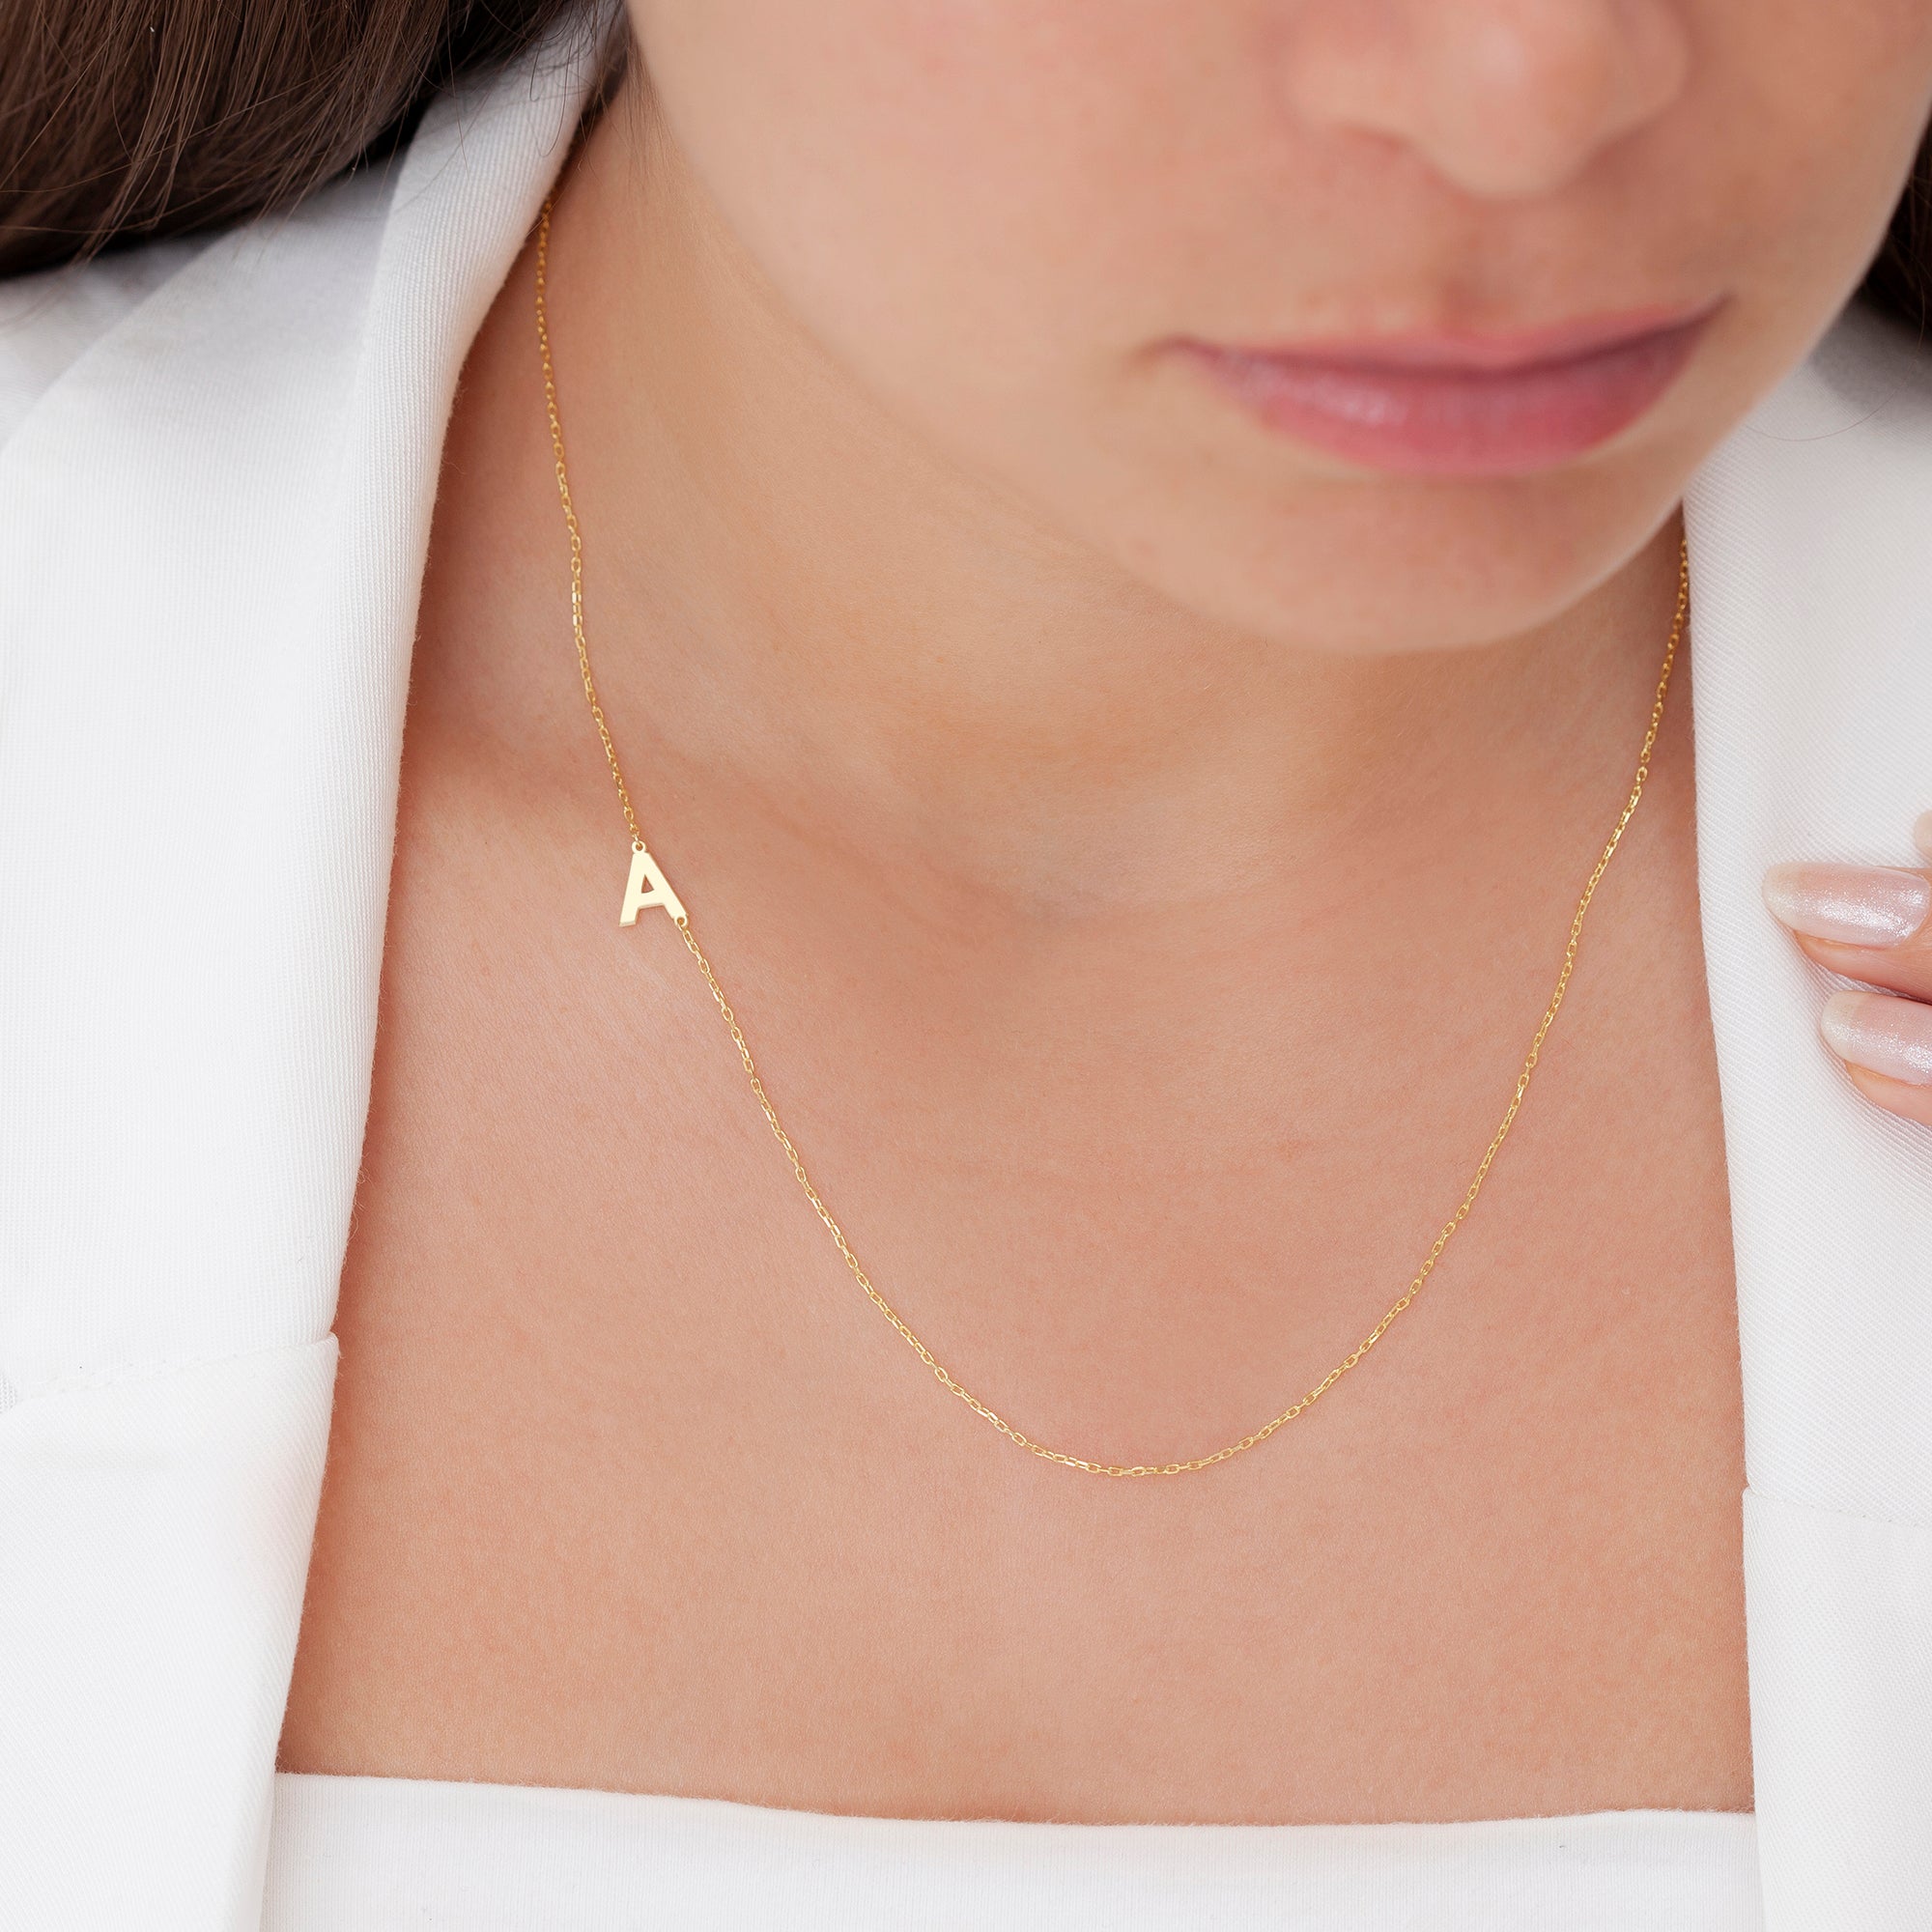 Buy Sideways Initial Necklace, Gold Letter Necklace, Delicate Diamond Gold  Personalized Nameplate, Dainty Simple Necklace, Everyday Jewelry Online in  India - Etsy